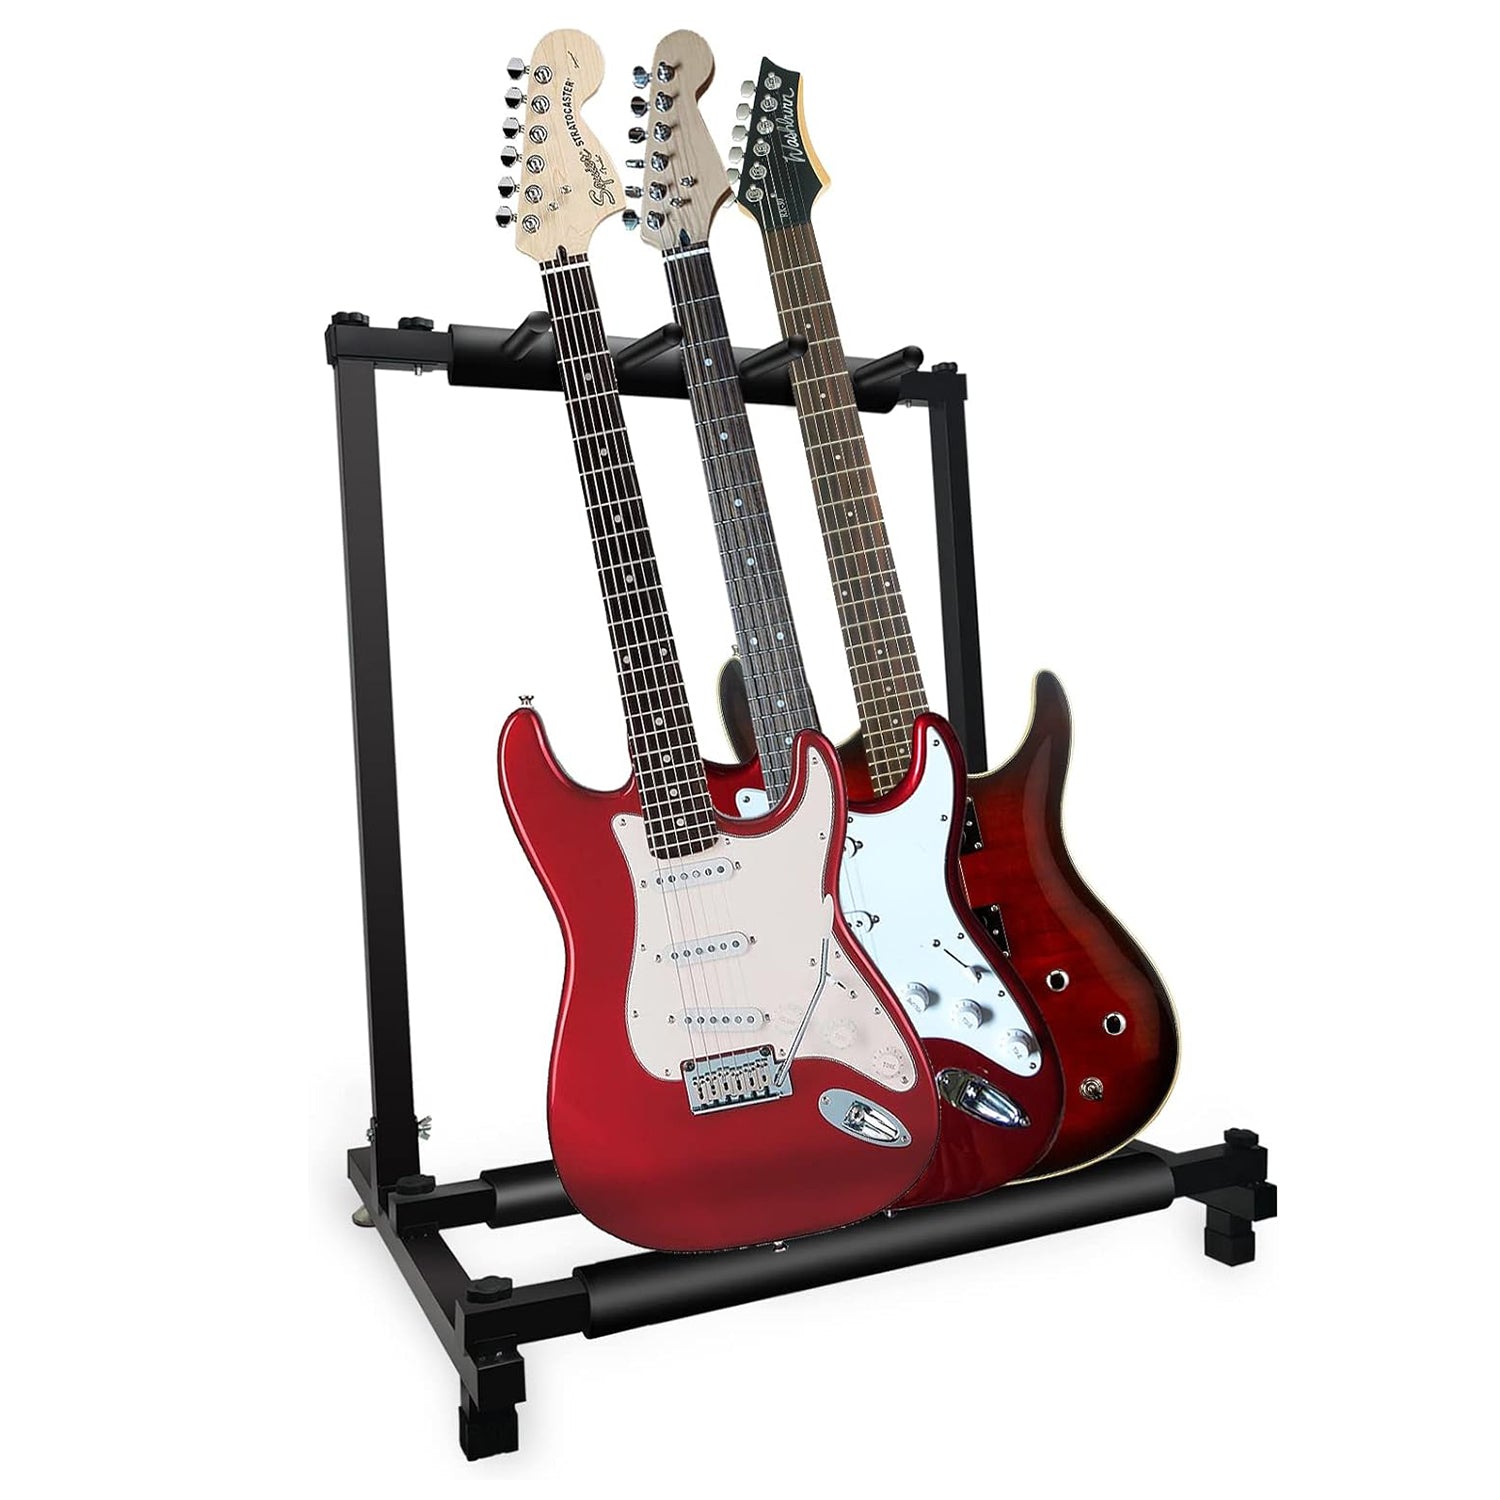 5Core Guitar Rack Stand Floor 3 5 7 9 Guitars Holder for Acoustic Electric Bass Guitar • Padded Multi Guitar Holder